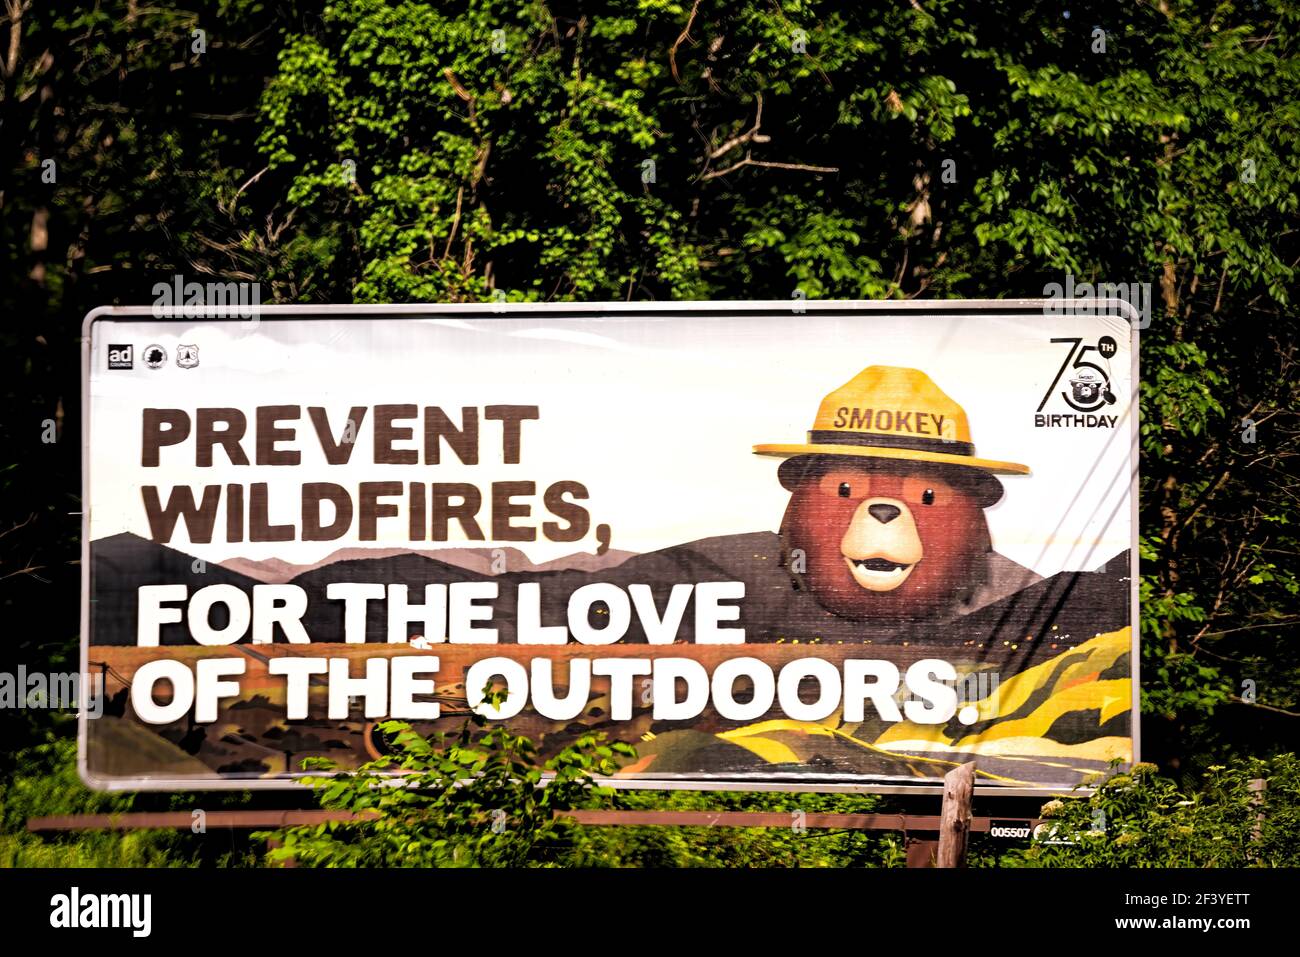 Shenandoah National Park, USA - June 9, 2020: Prevent wildfires, for love of outdoors warning danger sign with bear ranger mascot from National park s Stock Photo